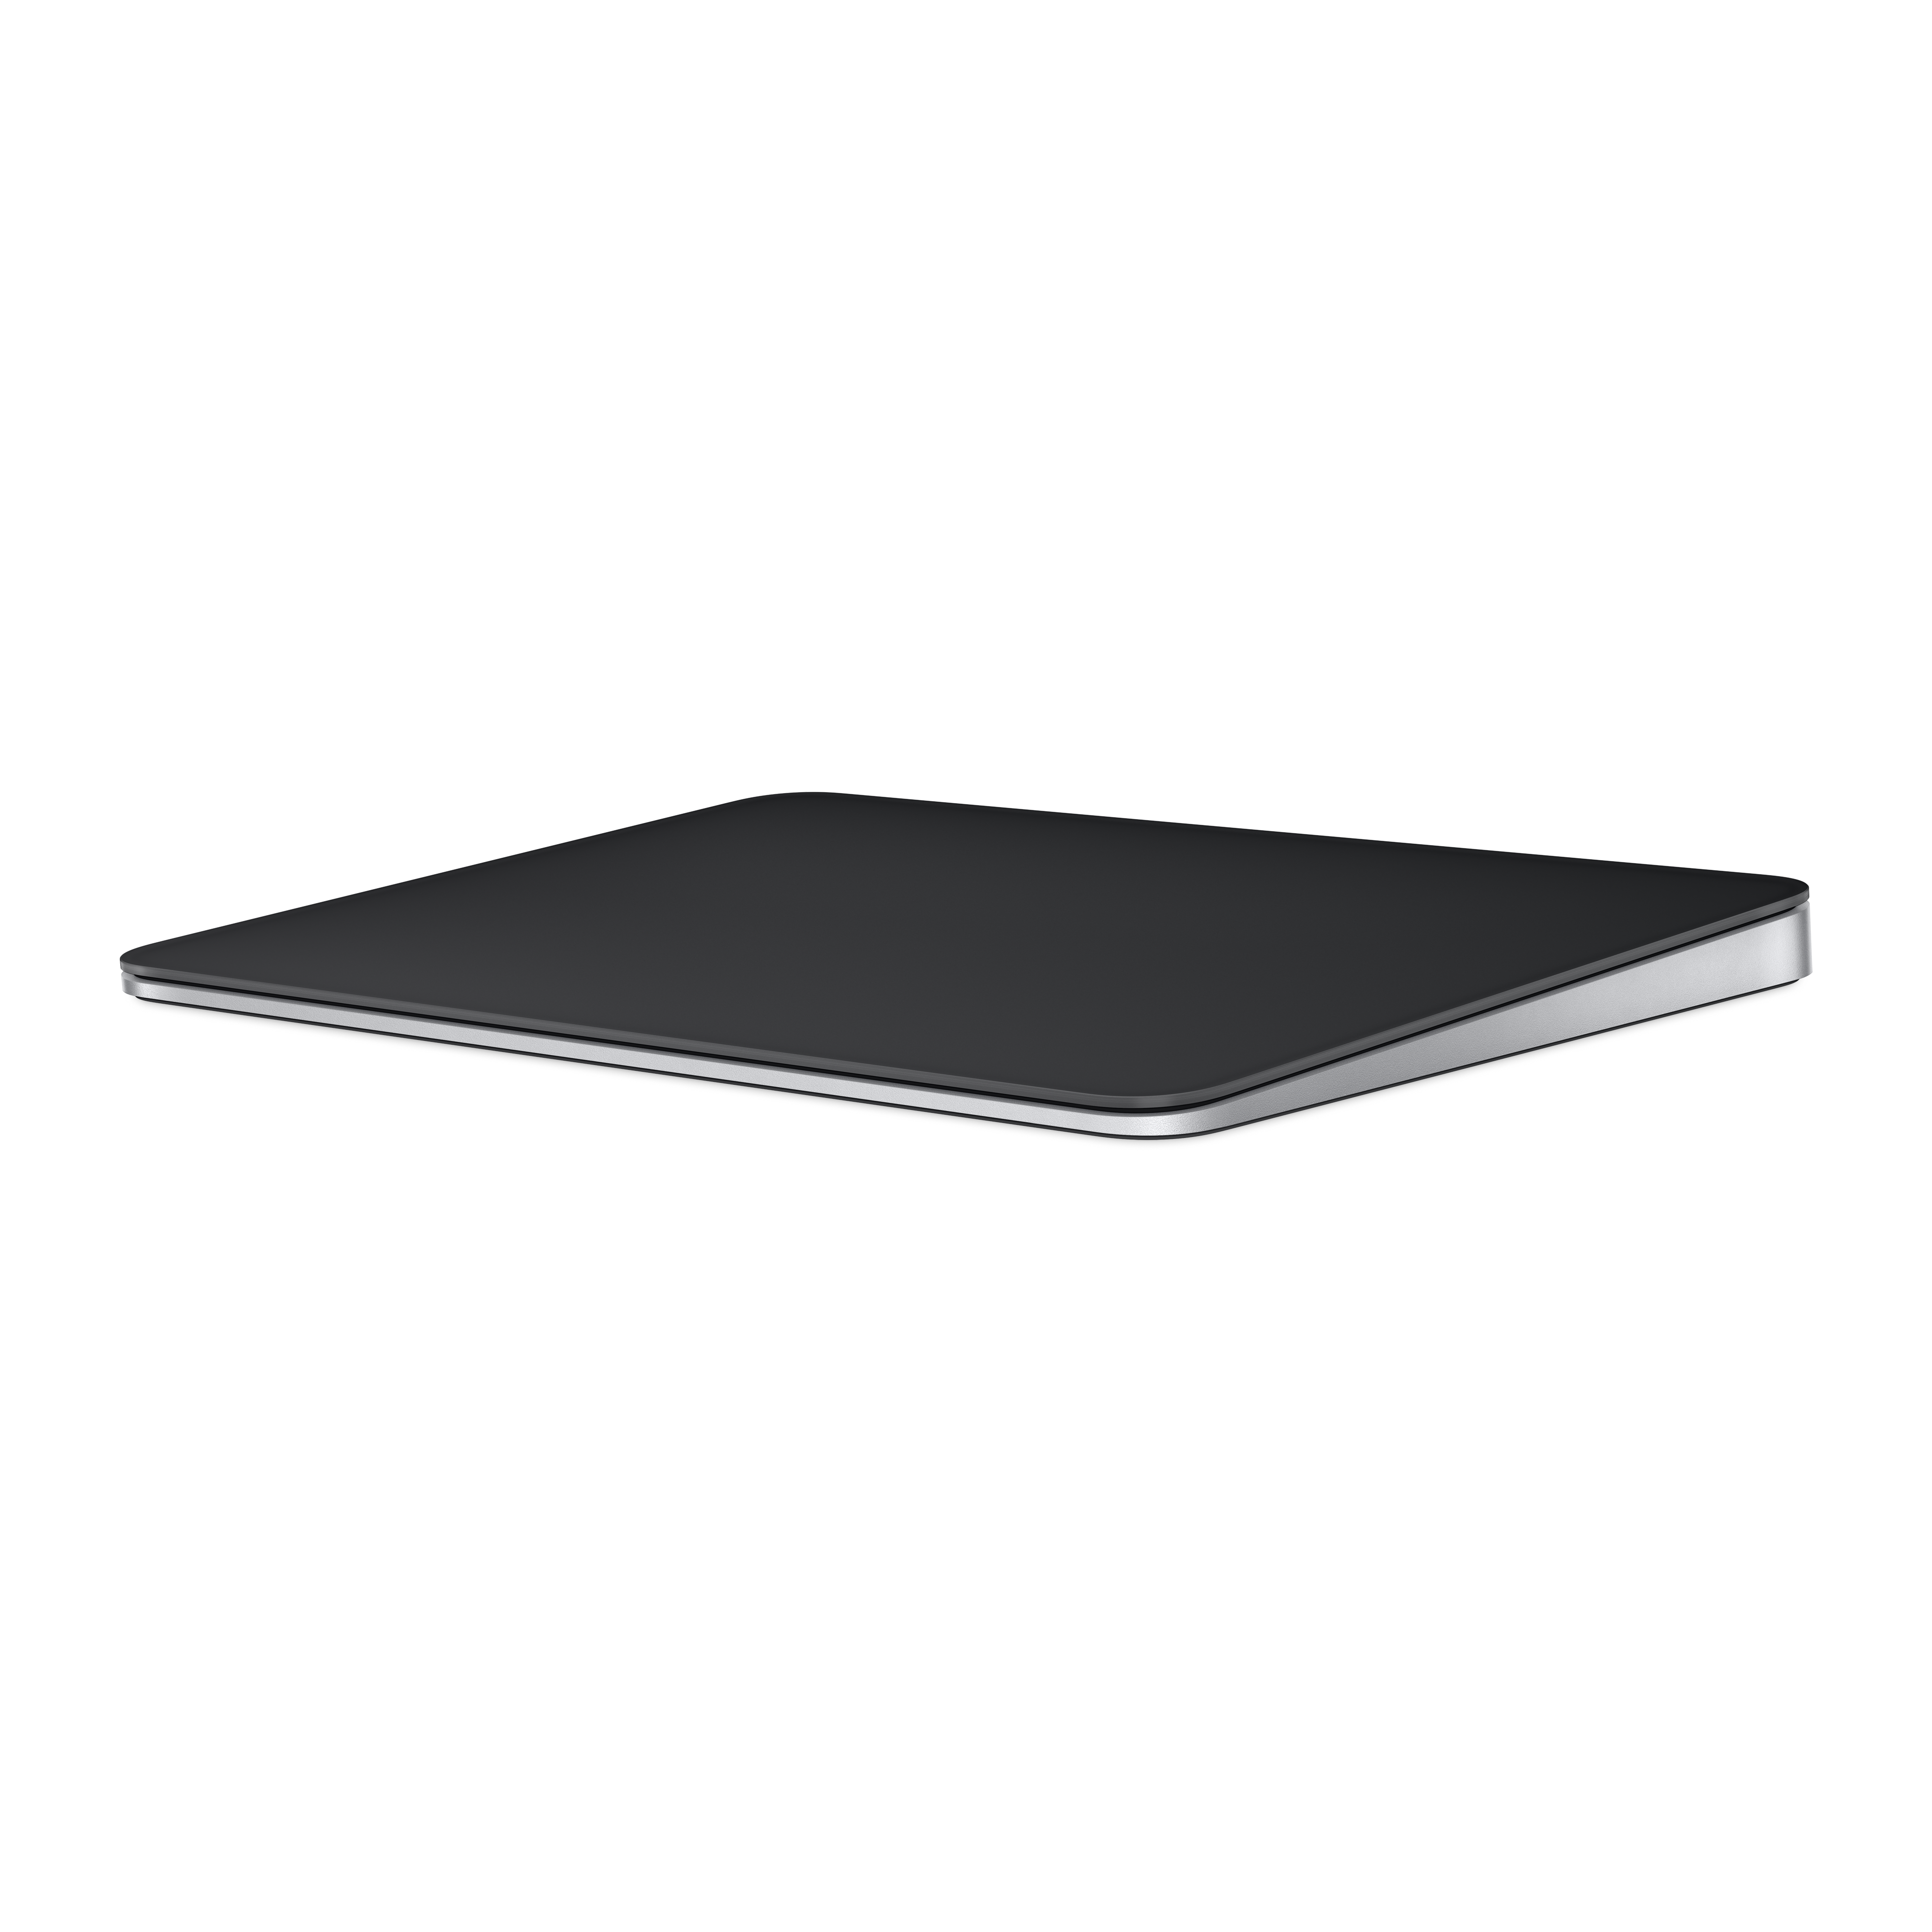 Magic Trackpad - Black Multi-Touch Surface - Apple (IN)